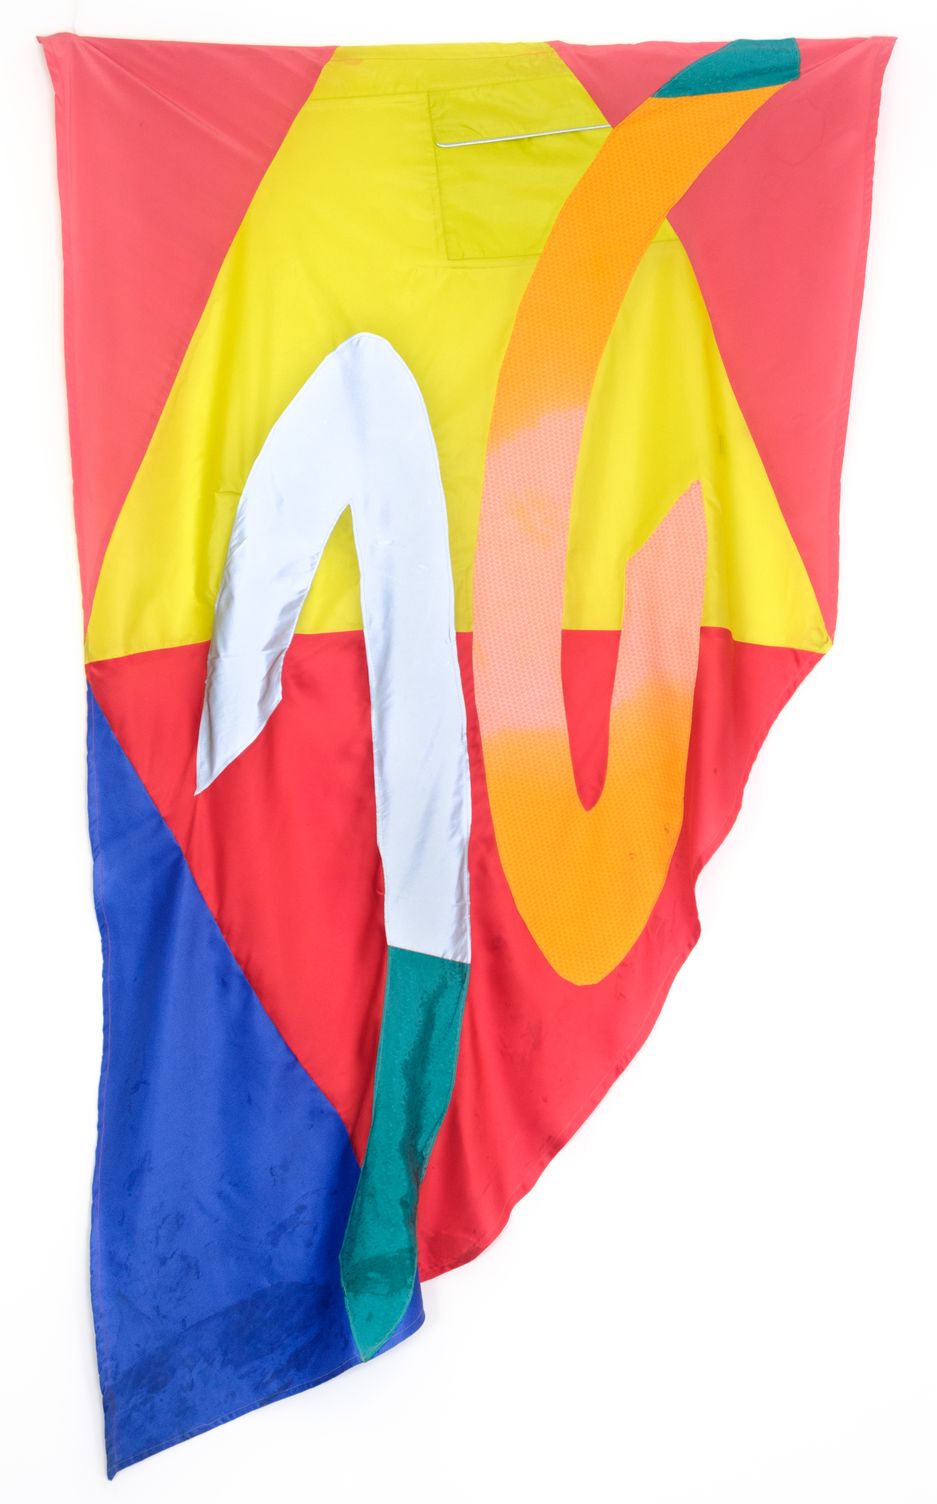 Multi Earthness (2018), Flag by Claudia Hill